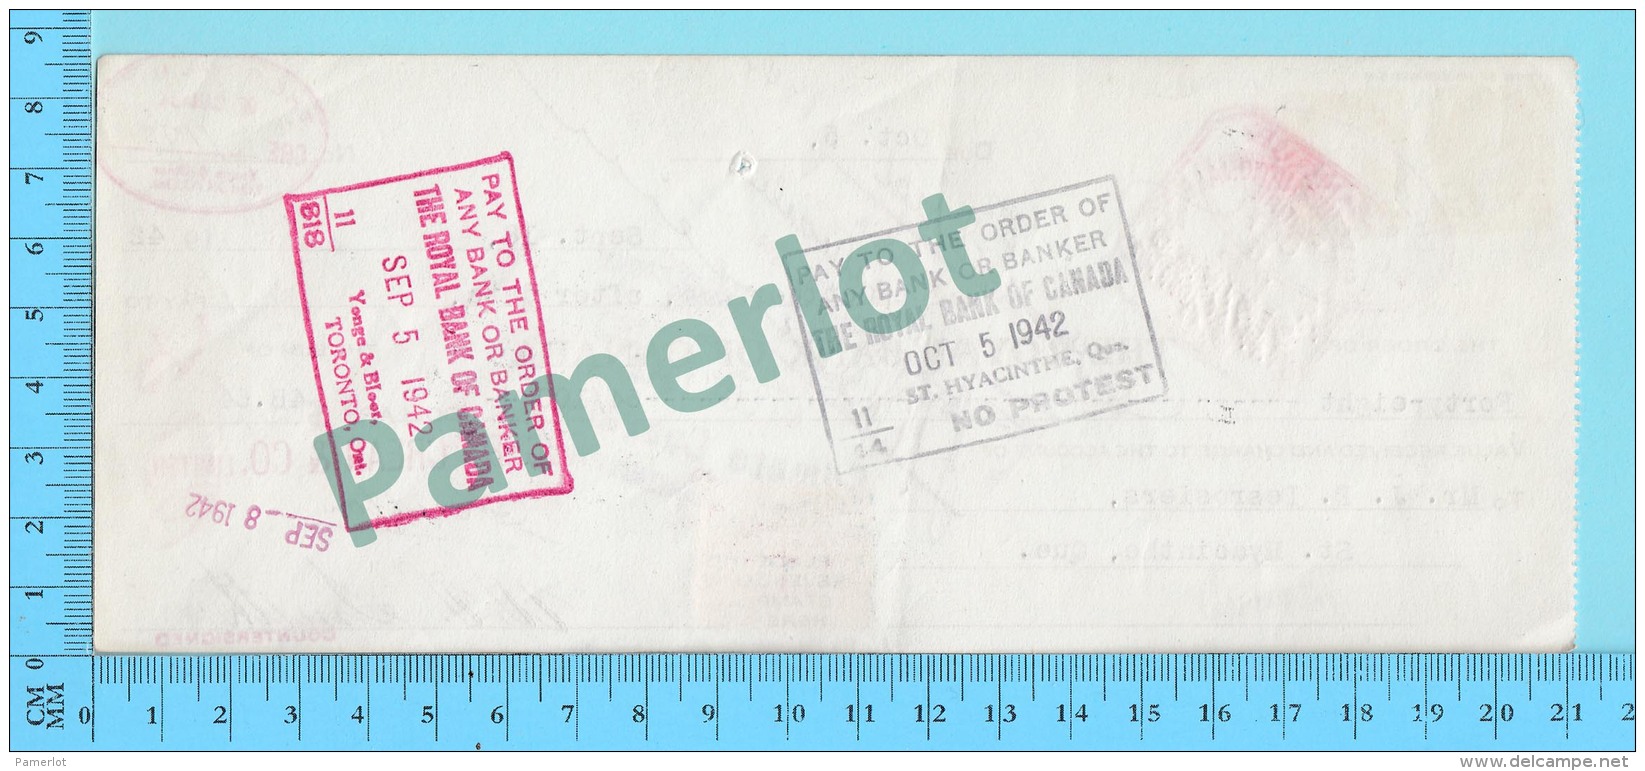 St-hyacinthe Quebec 1942 - $48.64, Cheque Certifié, Facture Robert Vrean &amp; Co.,  3 Cents Accise Timbre   -2 Scans - Cheques & Traveler's Cheques